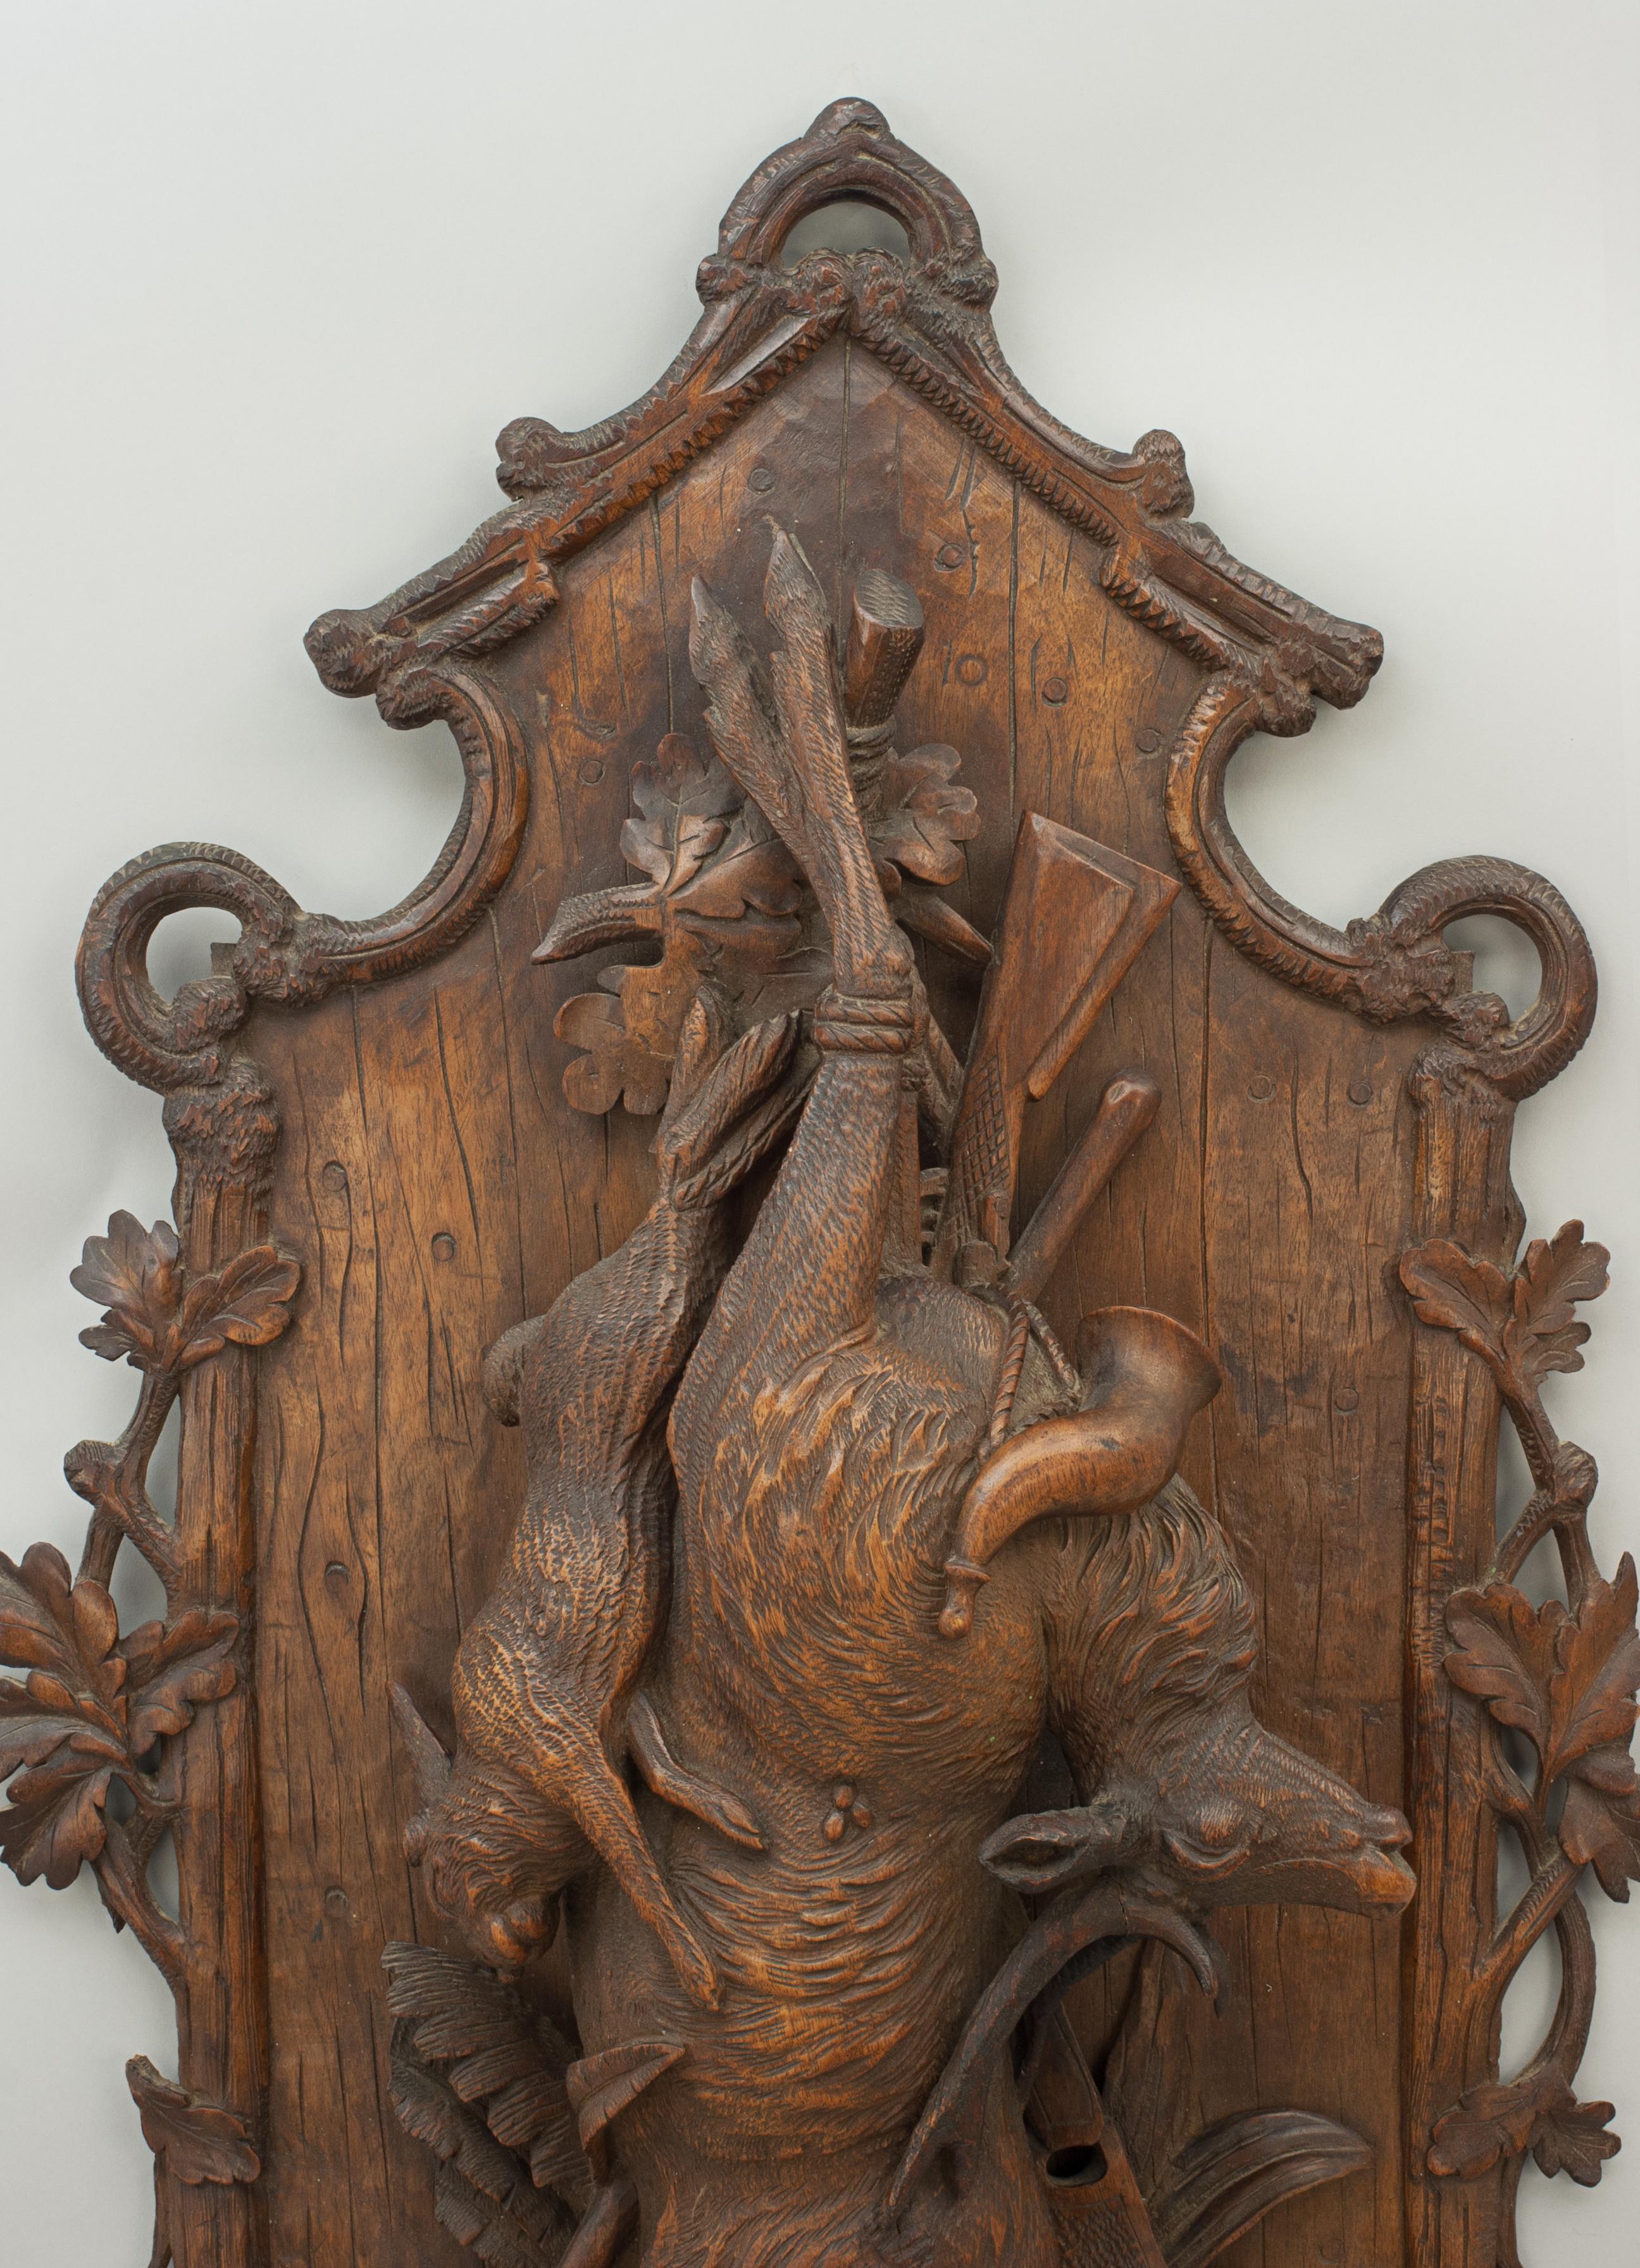 Large black forrest game plaque.
A charming large 19th century 'Black Forest' wall plaque of exceptional high quality. The beautiful antique wooden hunting wall plaque is with impressive carvings consisting of a deer, pheasant, hare, hunting horn,